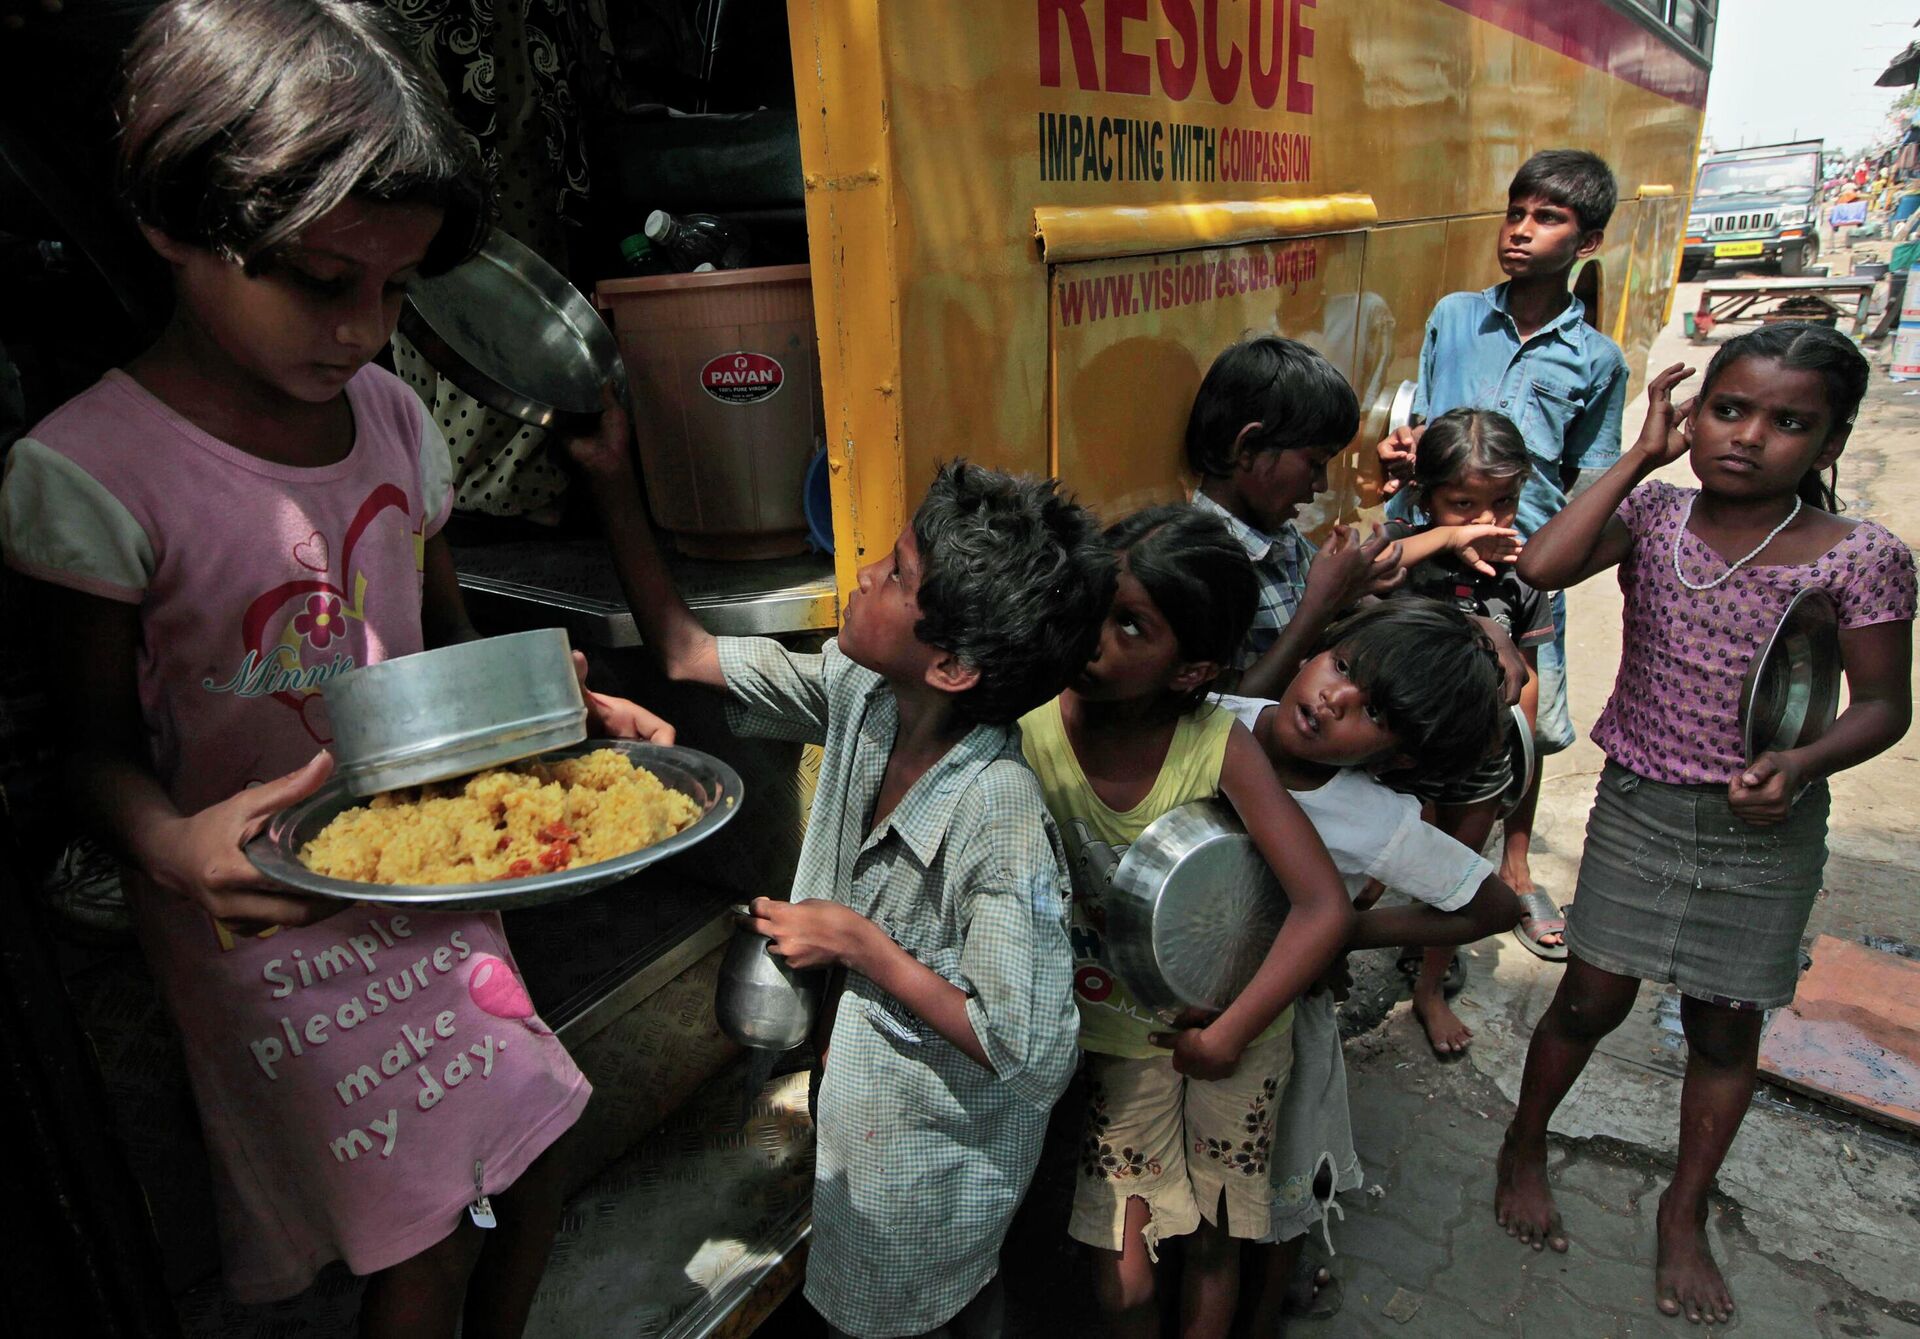 Children from a shanty await their turn to receive free food outside a mobile classroom in Mumbai, India. - Sputnik International, 1920, 17.09.2022